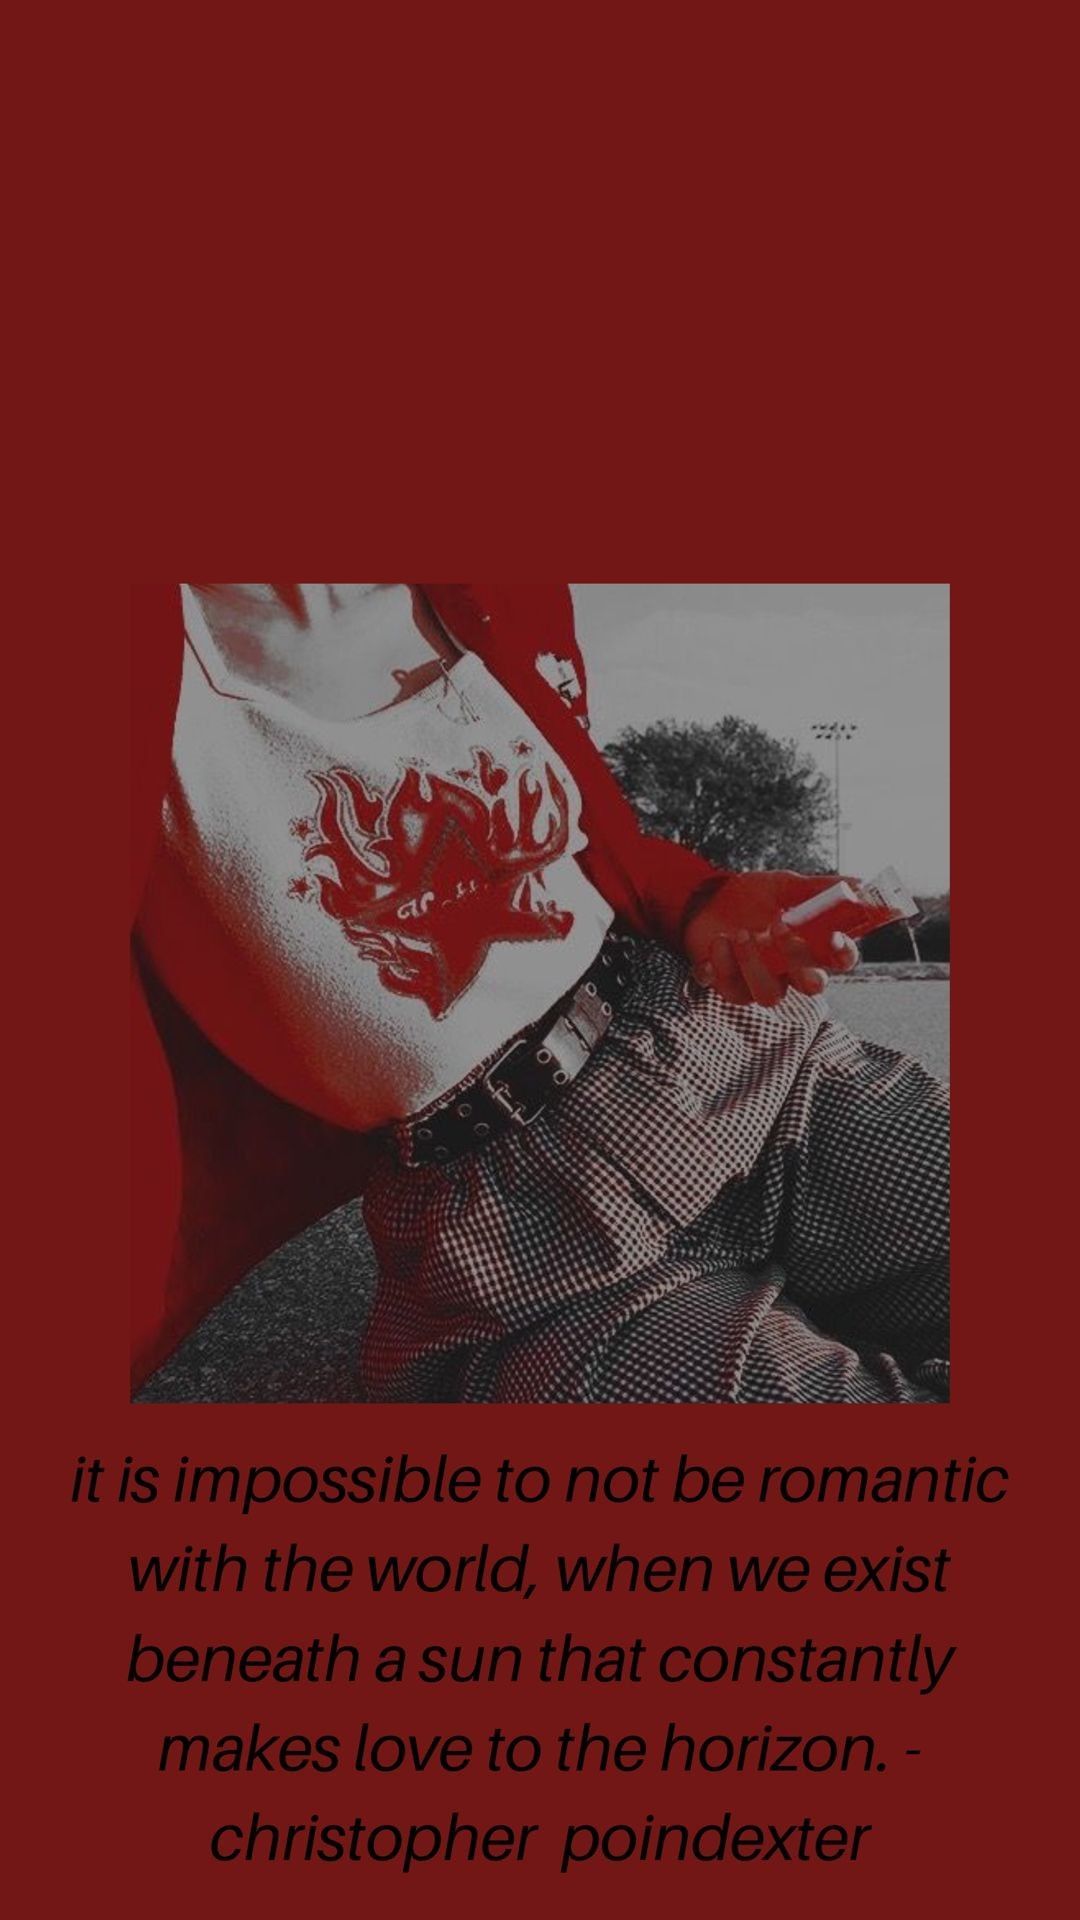 Red aesthetic wallpaper with quote from Christopher Poindexter. - IPhone red